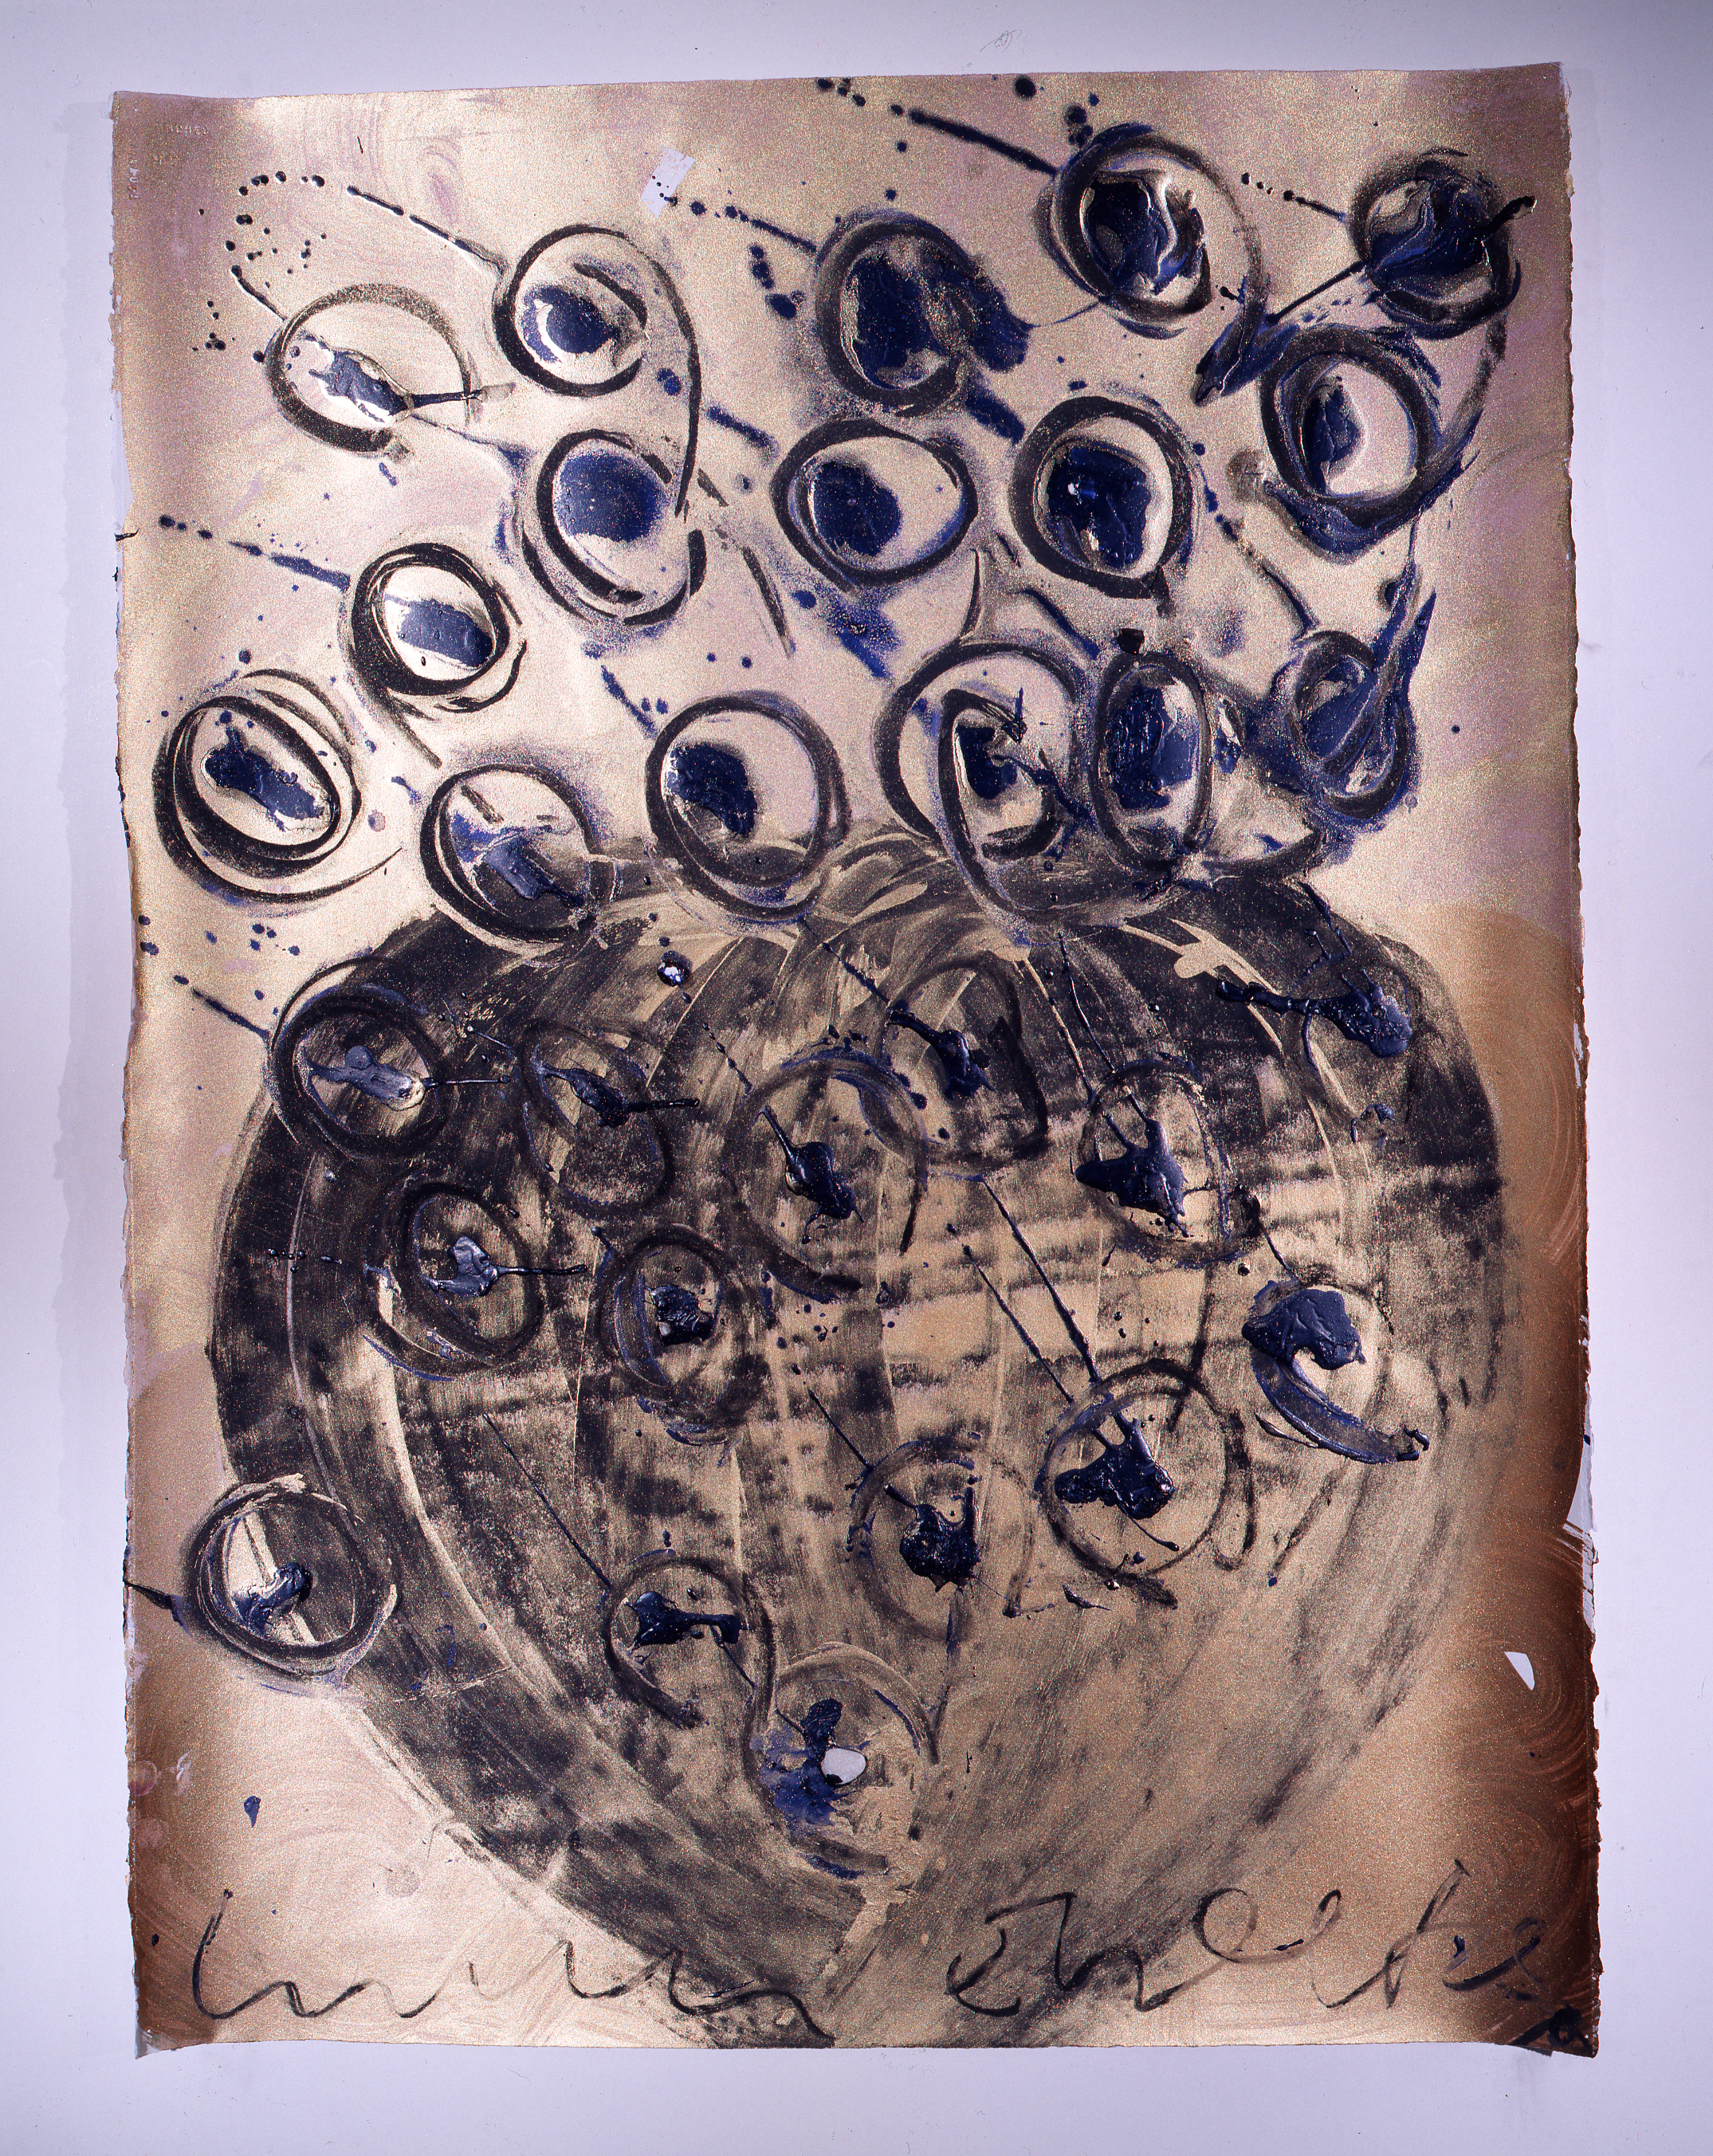  Dale Chihuly,&nbsp; Ebeltoft Drawing,&nbsp; (1991, mixed media on paper, 30 x 22 inches), DC.359 